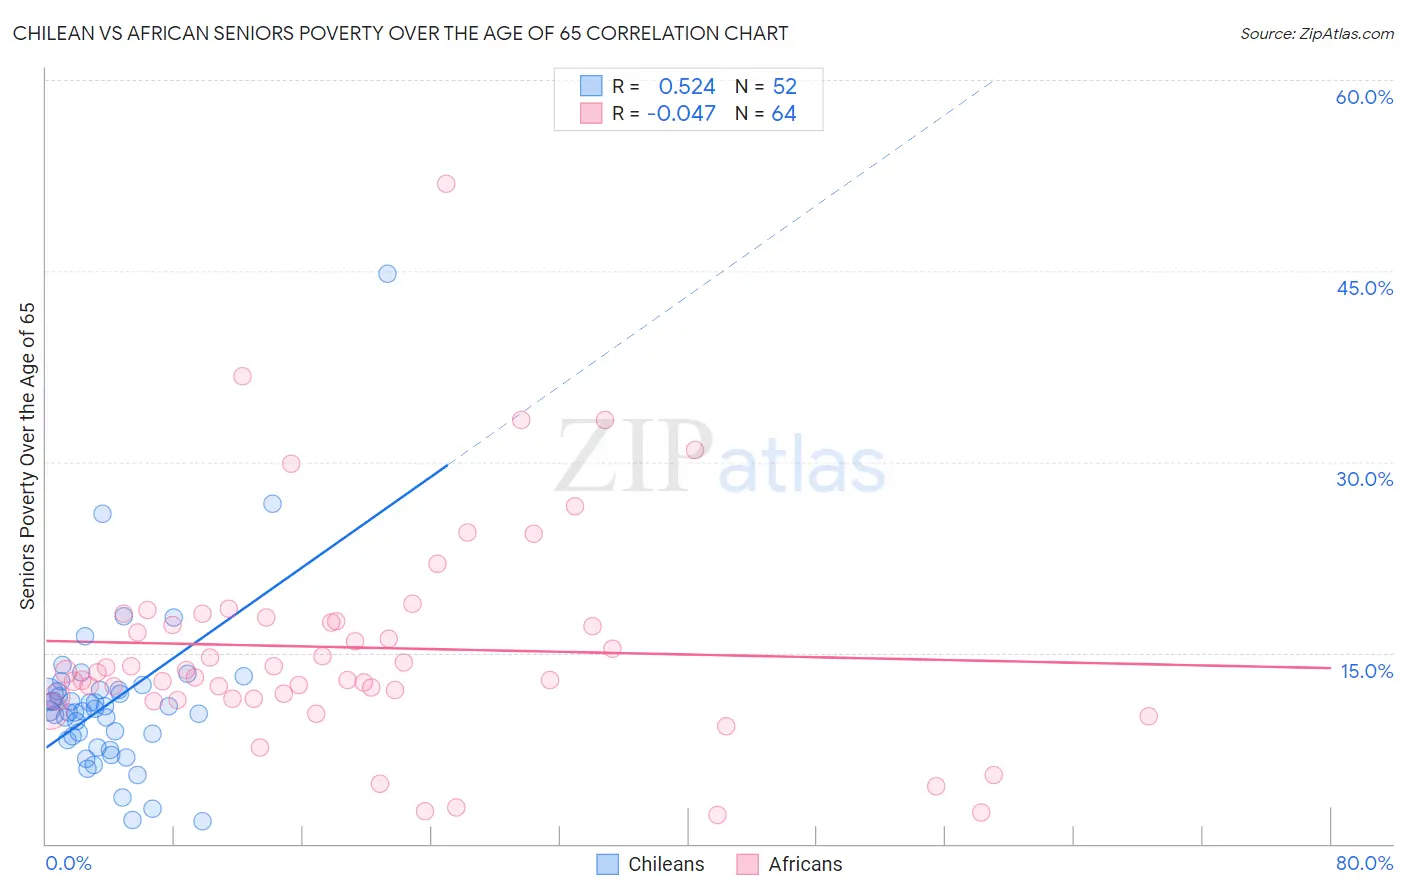 Chilean vs African Seniors Poverty Over the Age of 65